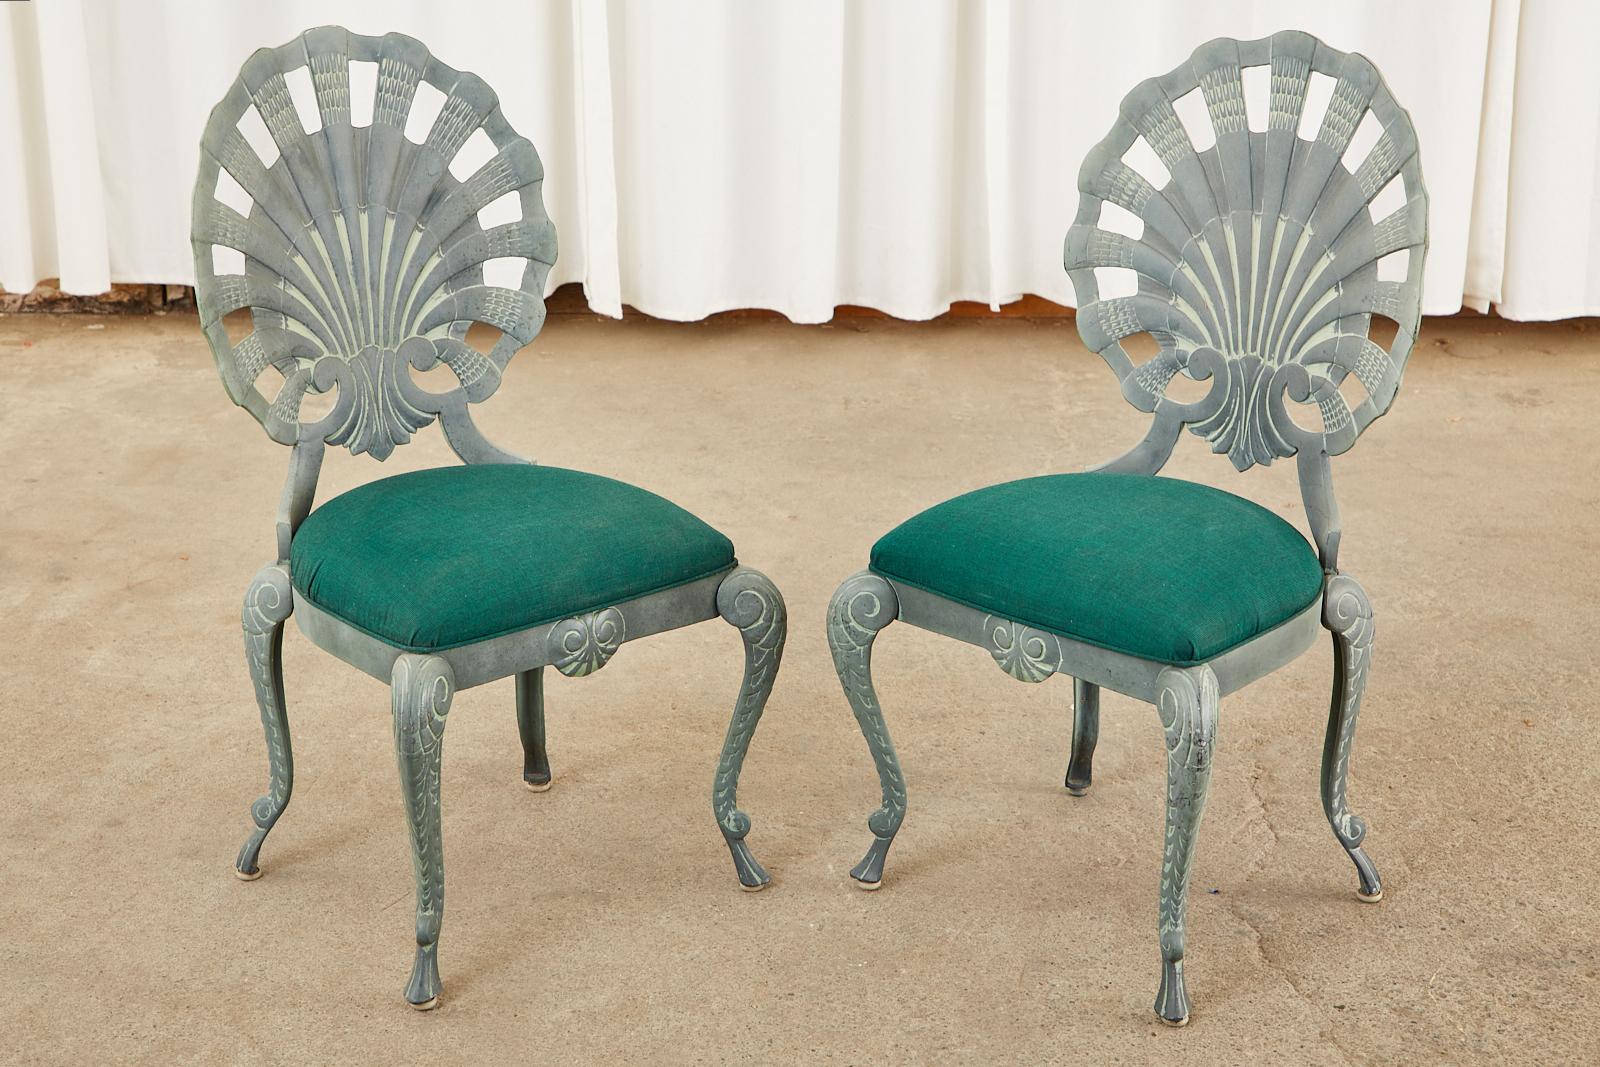 Aluminum Set of Six Neoclassical Style Grotto Clamshell Garden Chairs